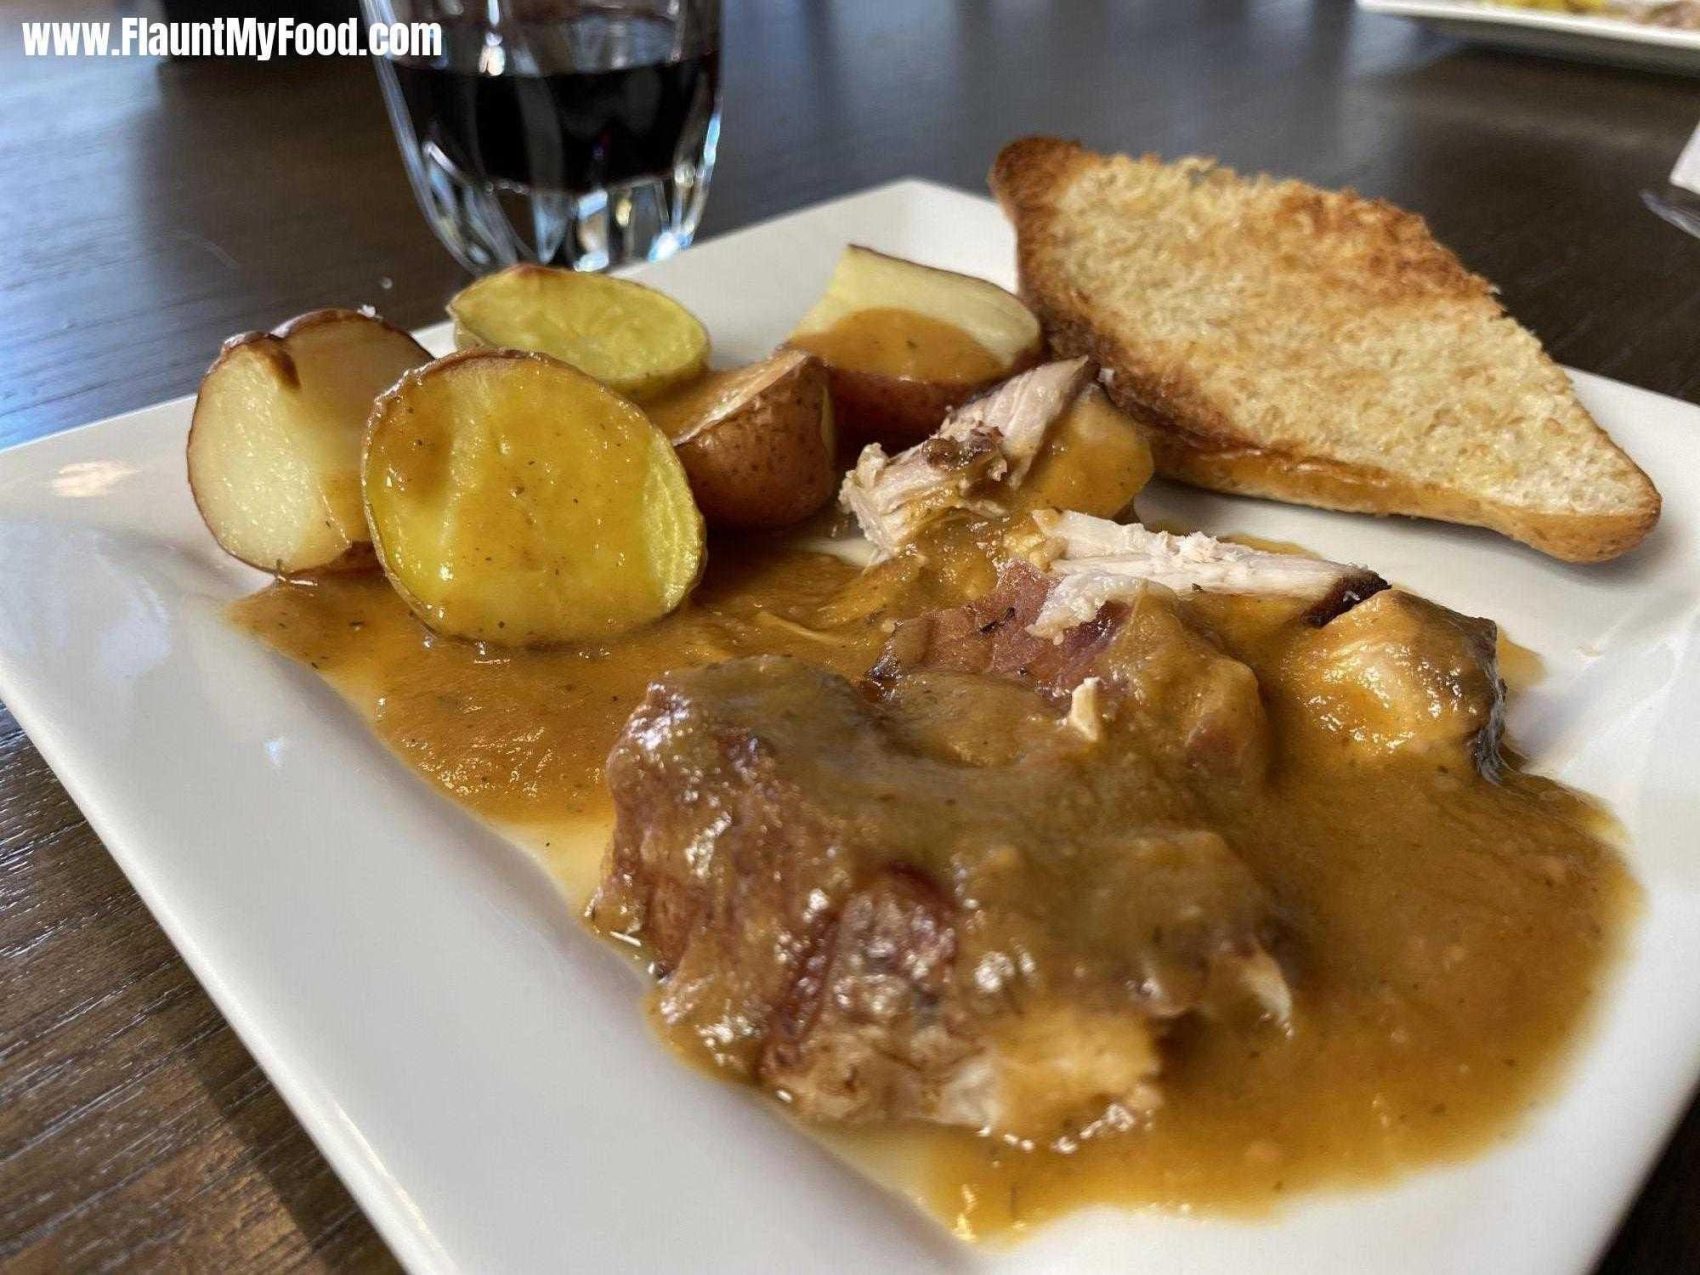 Braised Pork LoinBraised pork loin covered in gravy made from its cooking juices, including Chronic Cellars red blend wine, and vegetables. Side of roasted potatoes and buttered toast..